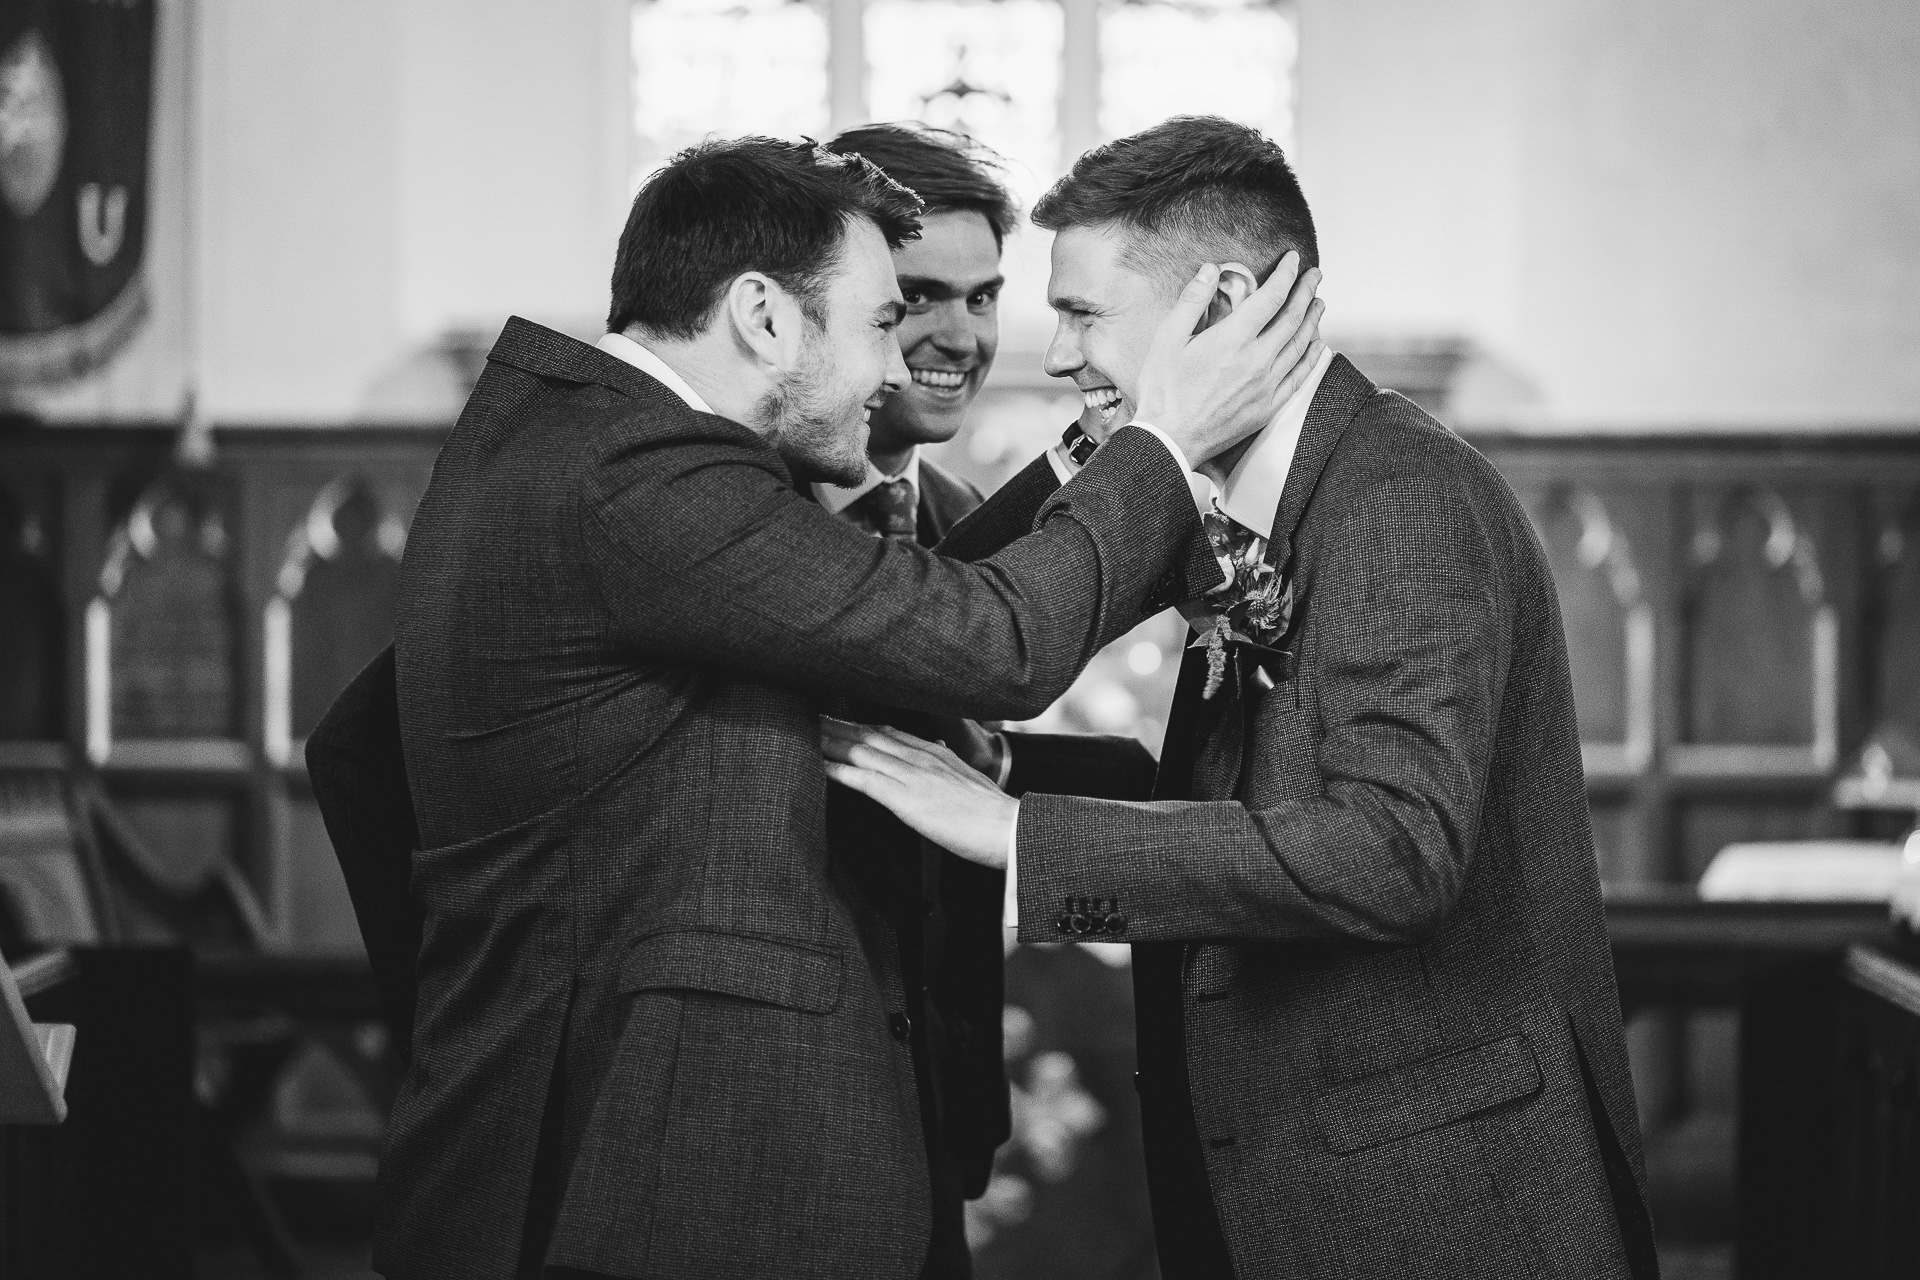 Groomsmen laughing together in a church